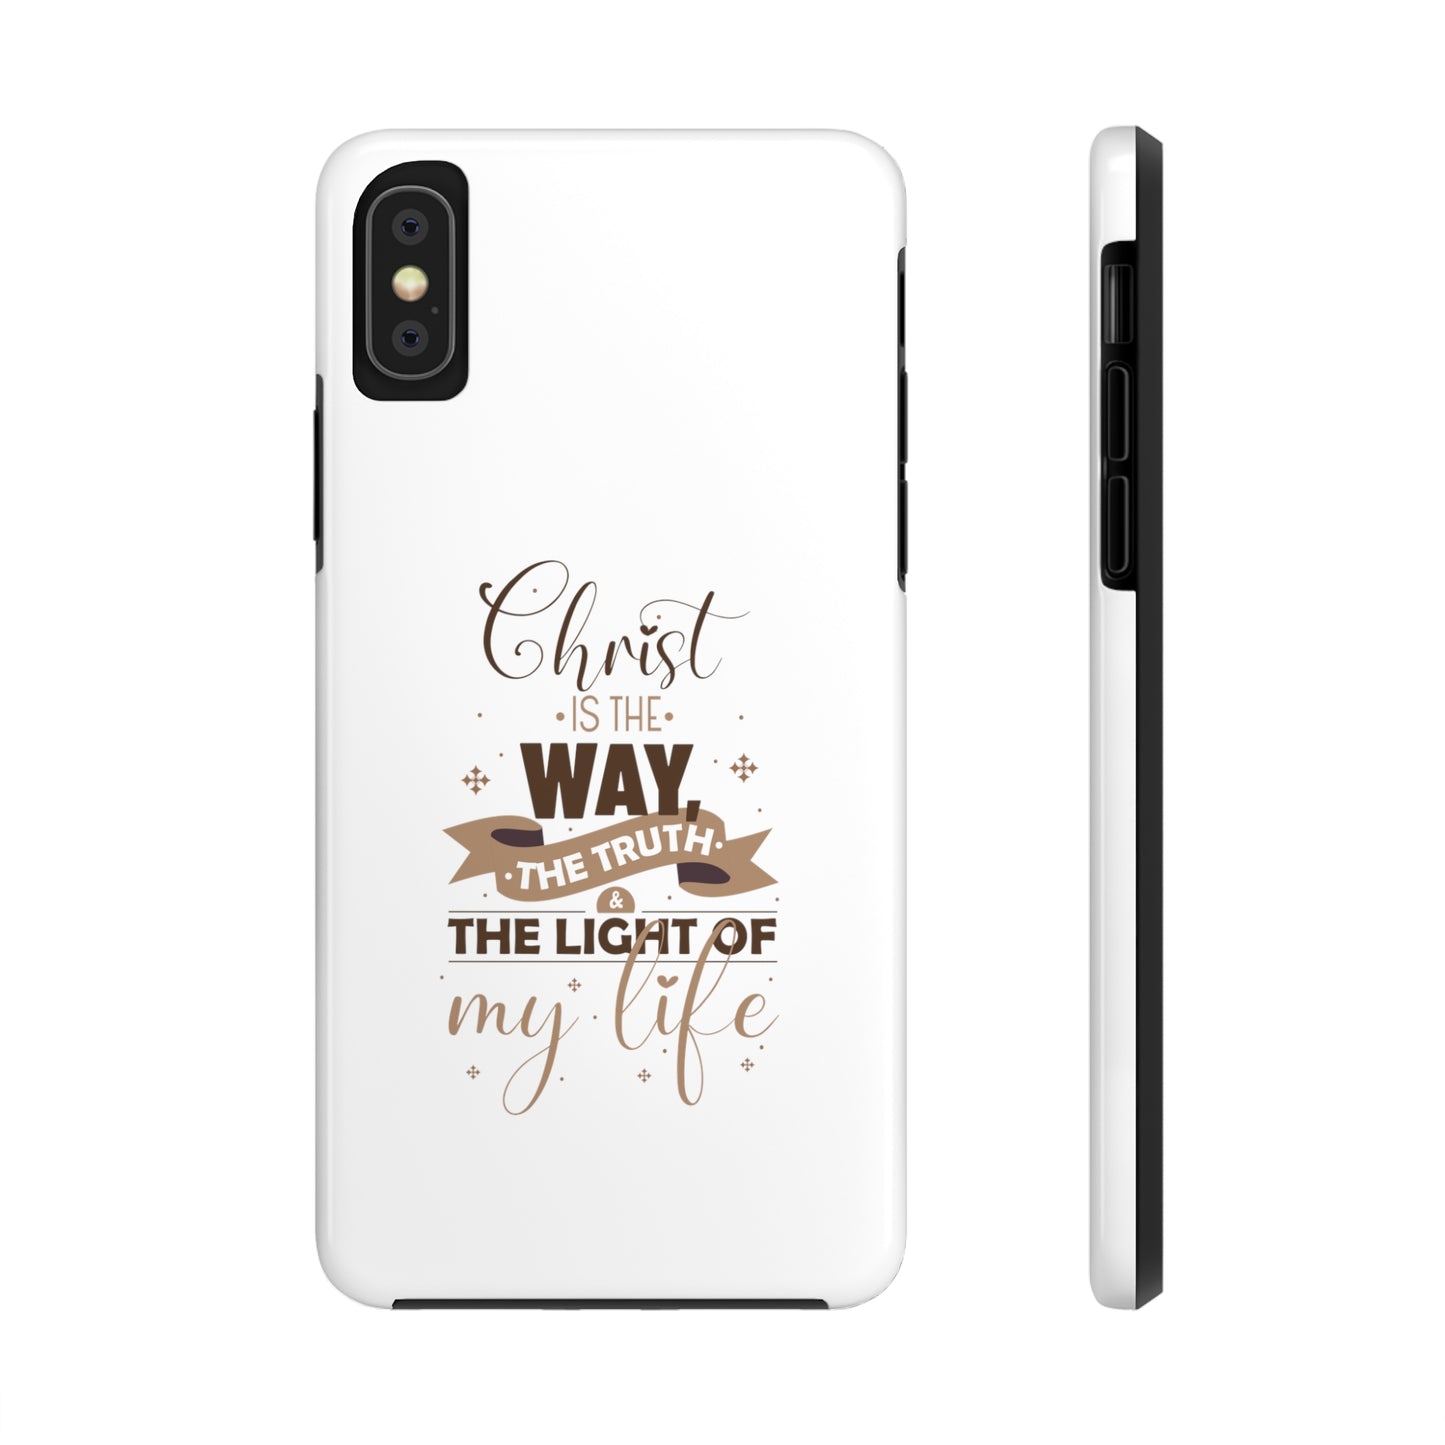 Christ Is The Way, The Truth, & The Light Of My Life Tough Phone Cases, Case-Mate